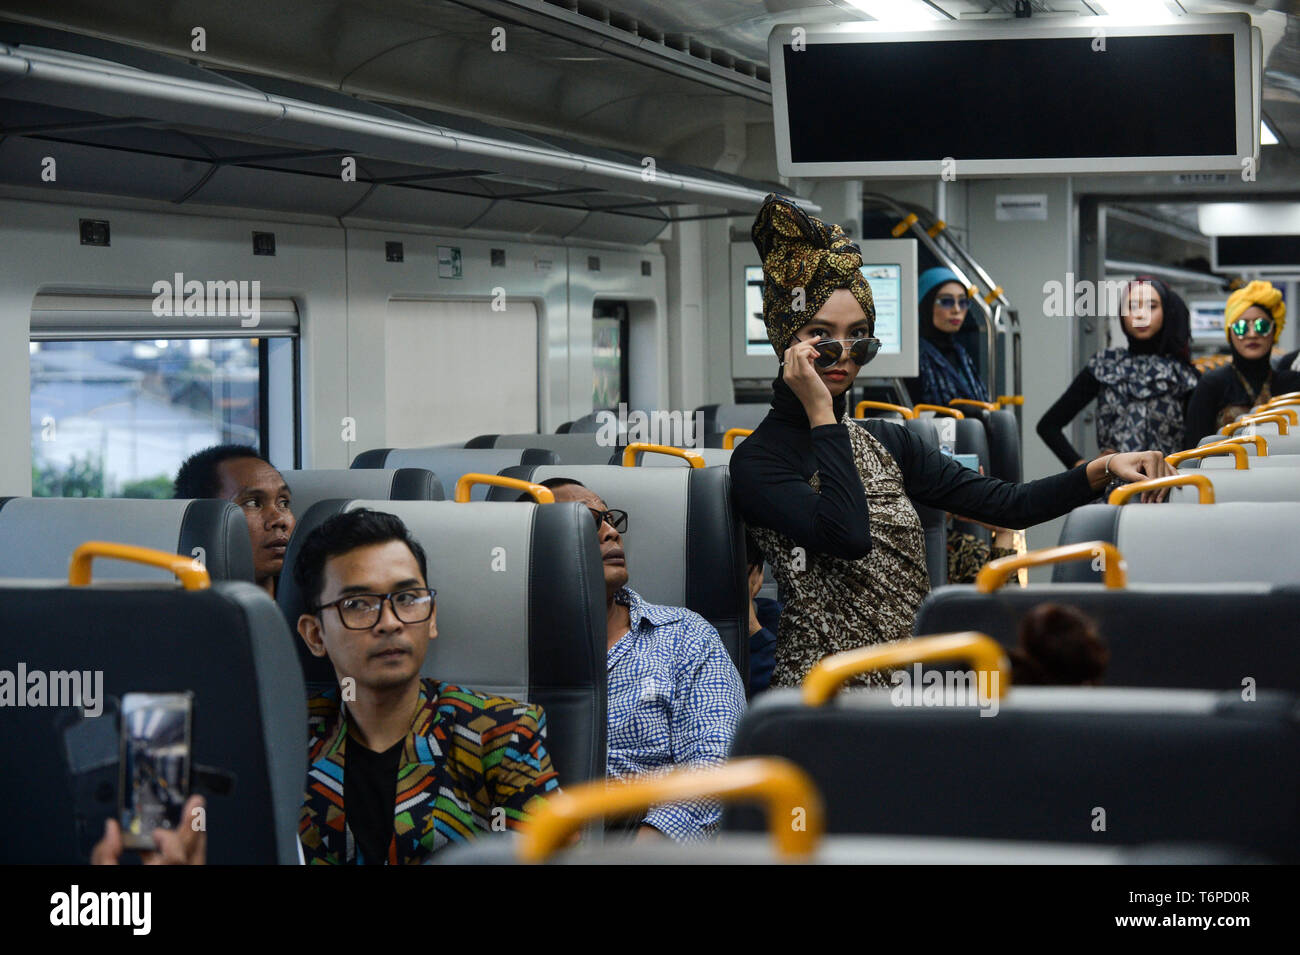 Jakarta, Indonesia. 2nd May, 2019. Models present creations during Fashion Show on Train, an event held to welcome the Ramadan month, in Jakarta, Indonesia, May 2, 2019. Credit: Agung Kuncahya B./Xinhua/Alamy Live News Stock Photo